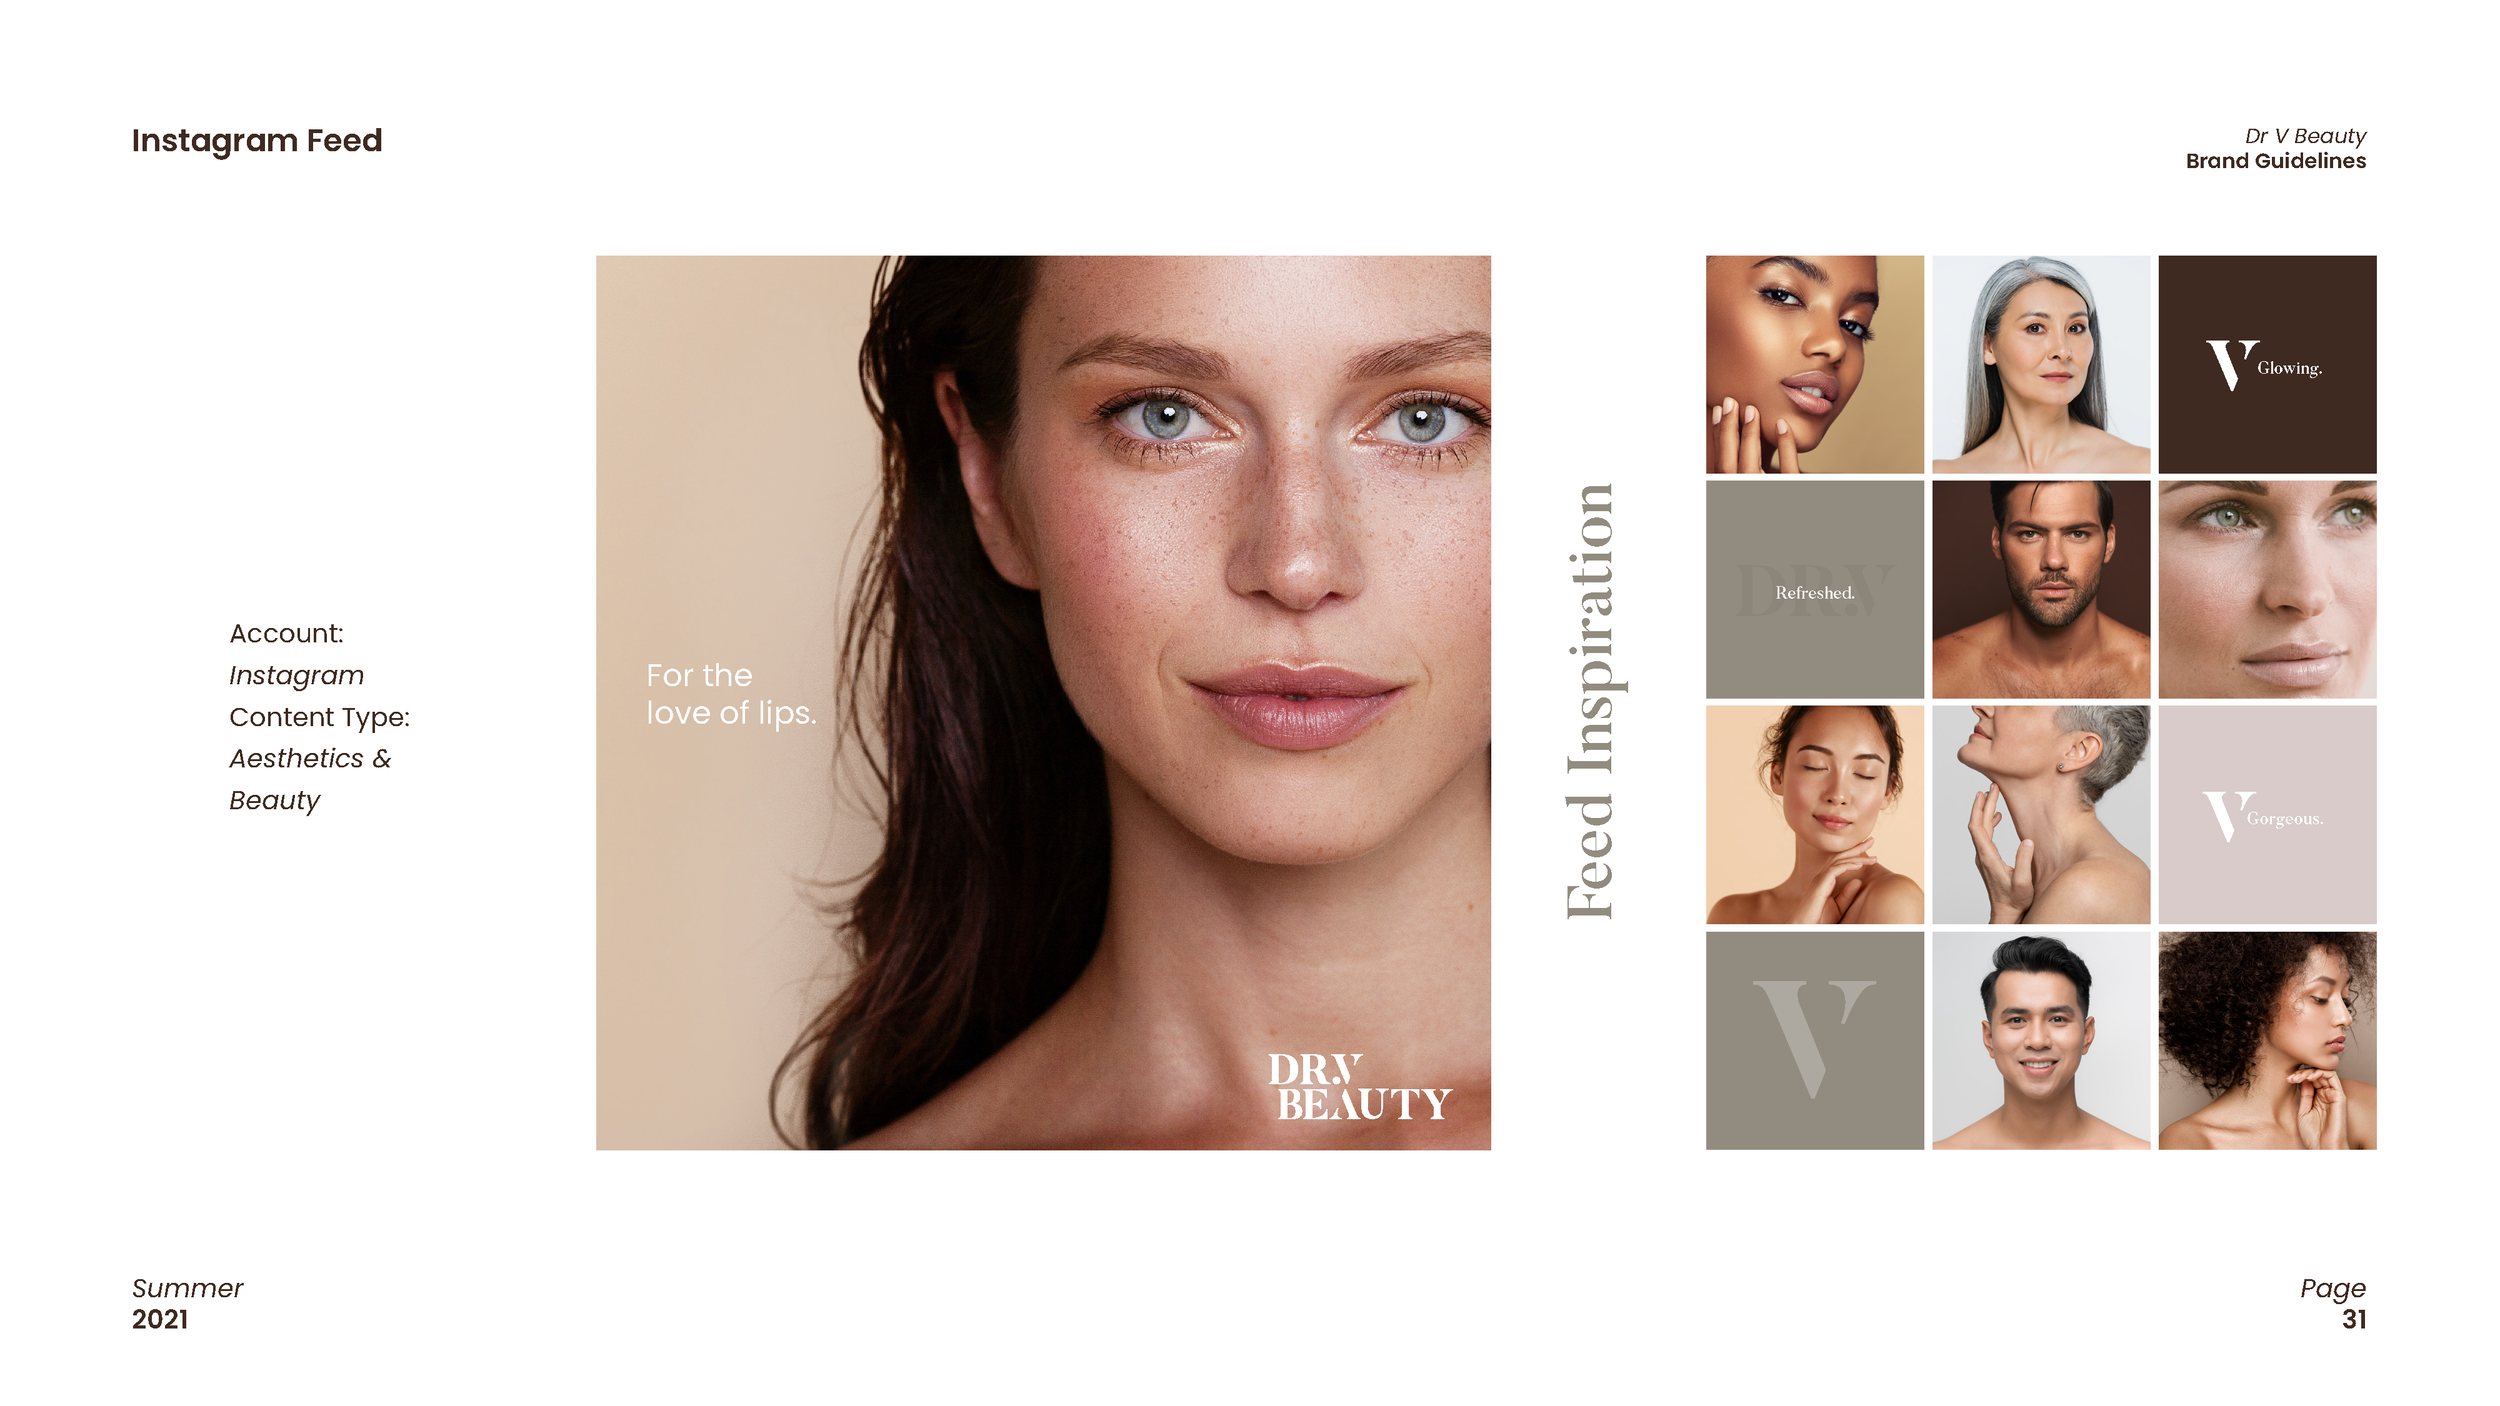 Dr V Beauty - Brand Guidelines_Page_31.png